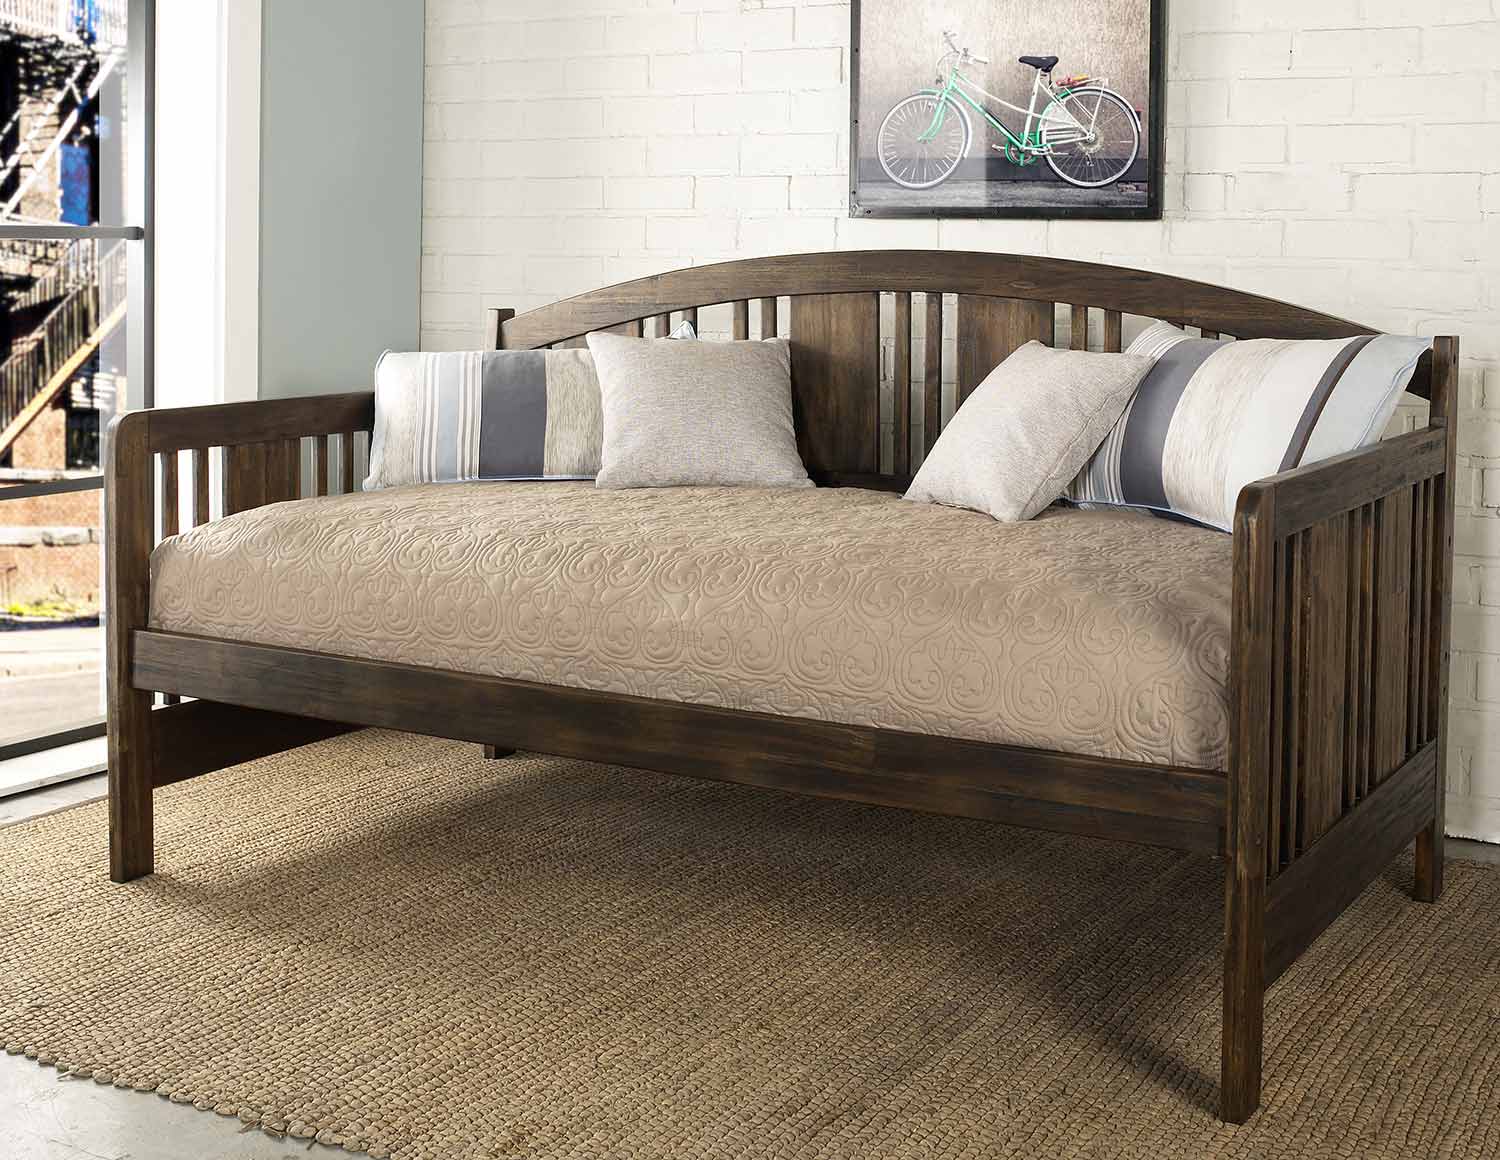 Hillsdale Dana Daybed - Brushed Acacia